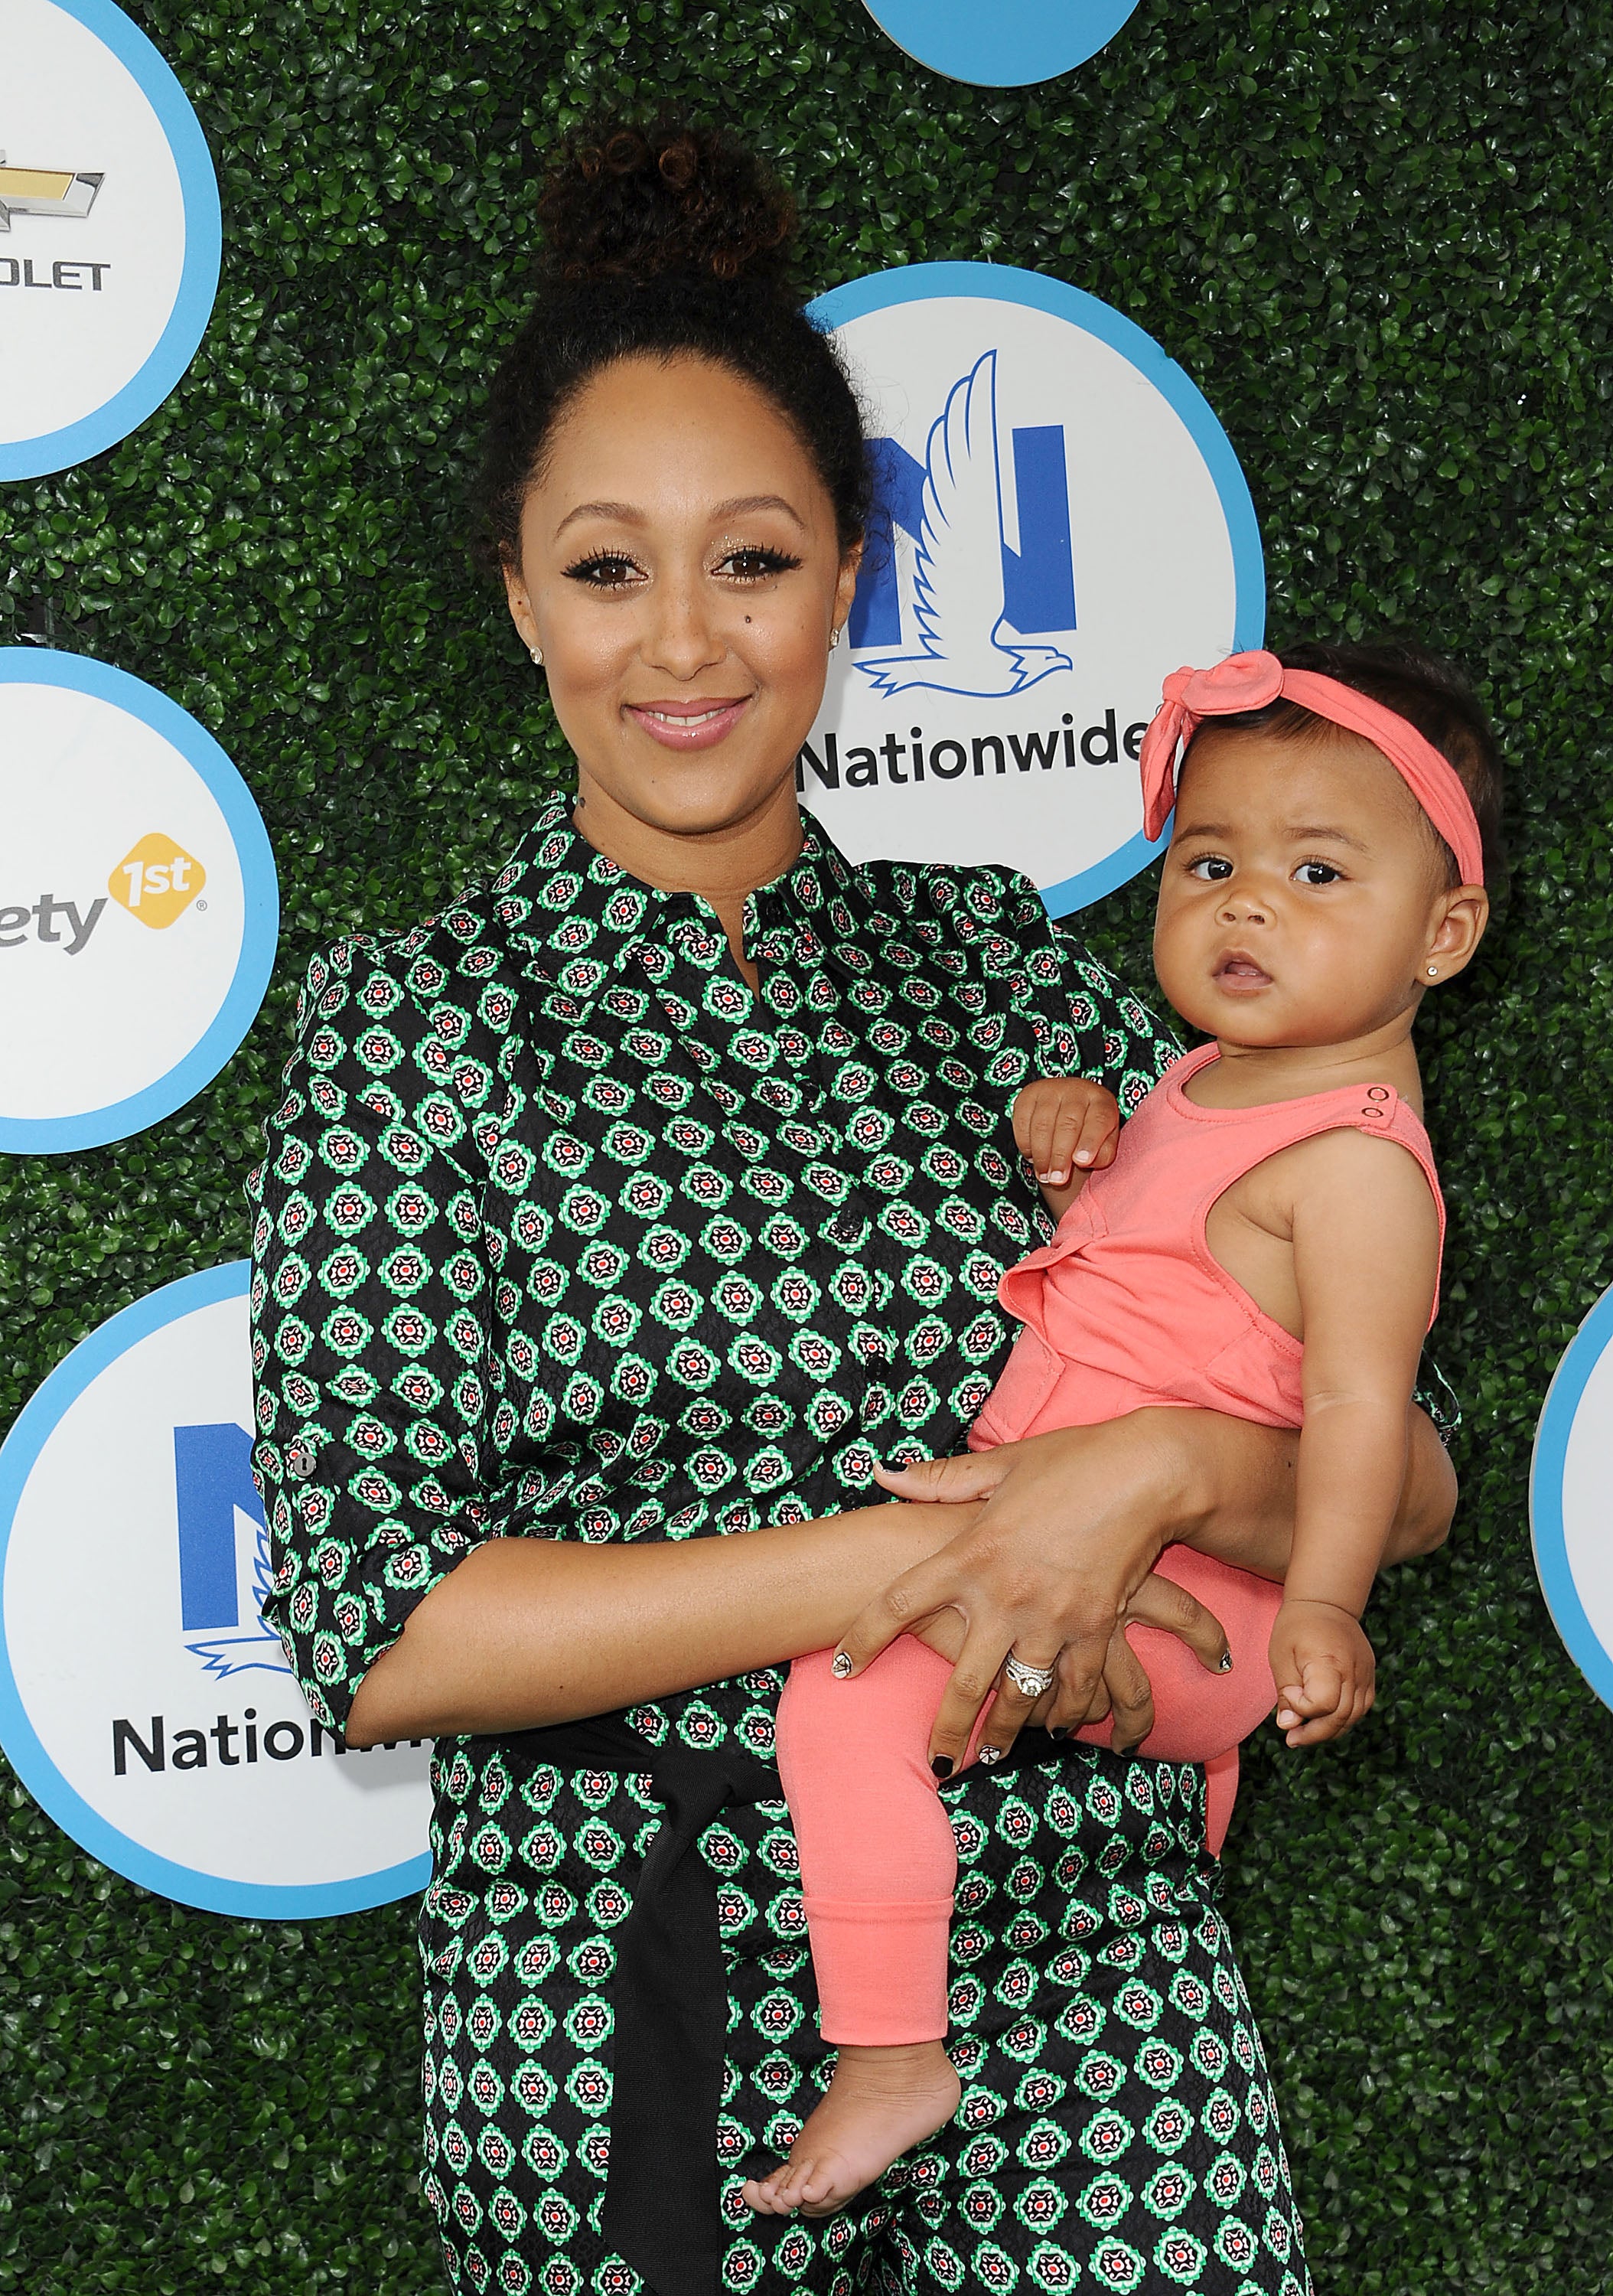 Photo Fab: Tamera Mowry and Ariah Are Picture-Perfect in Their Turbans
